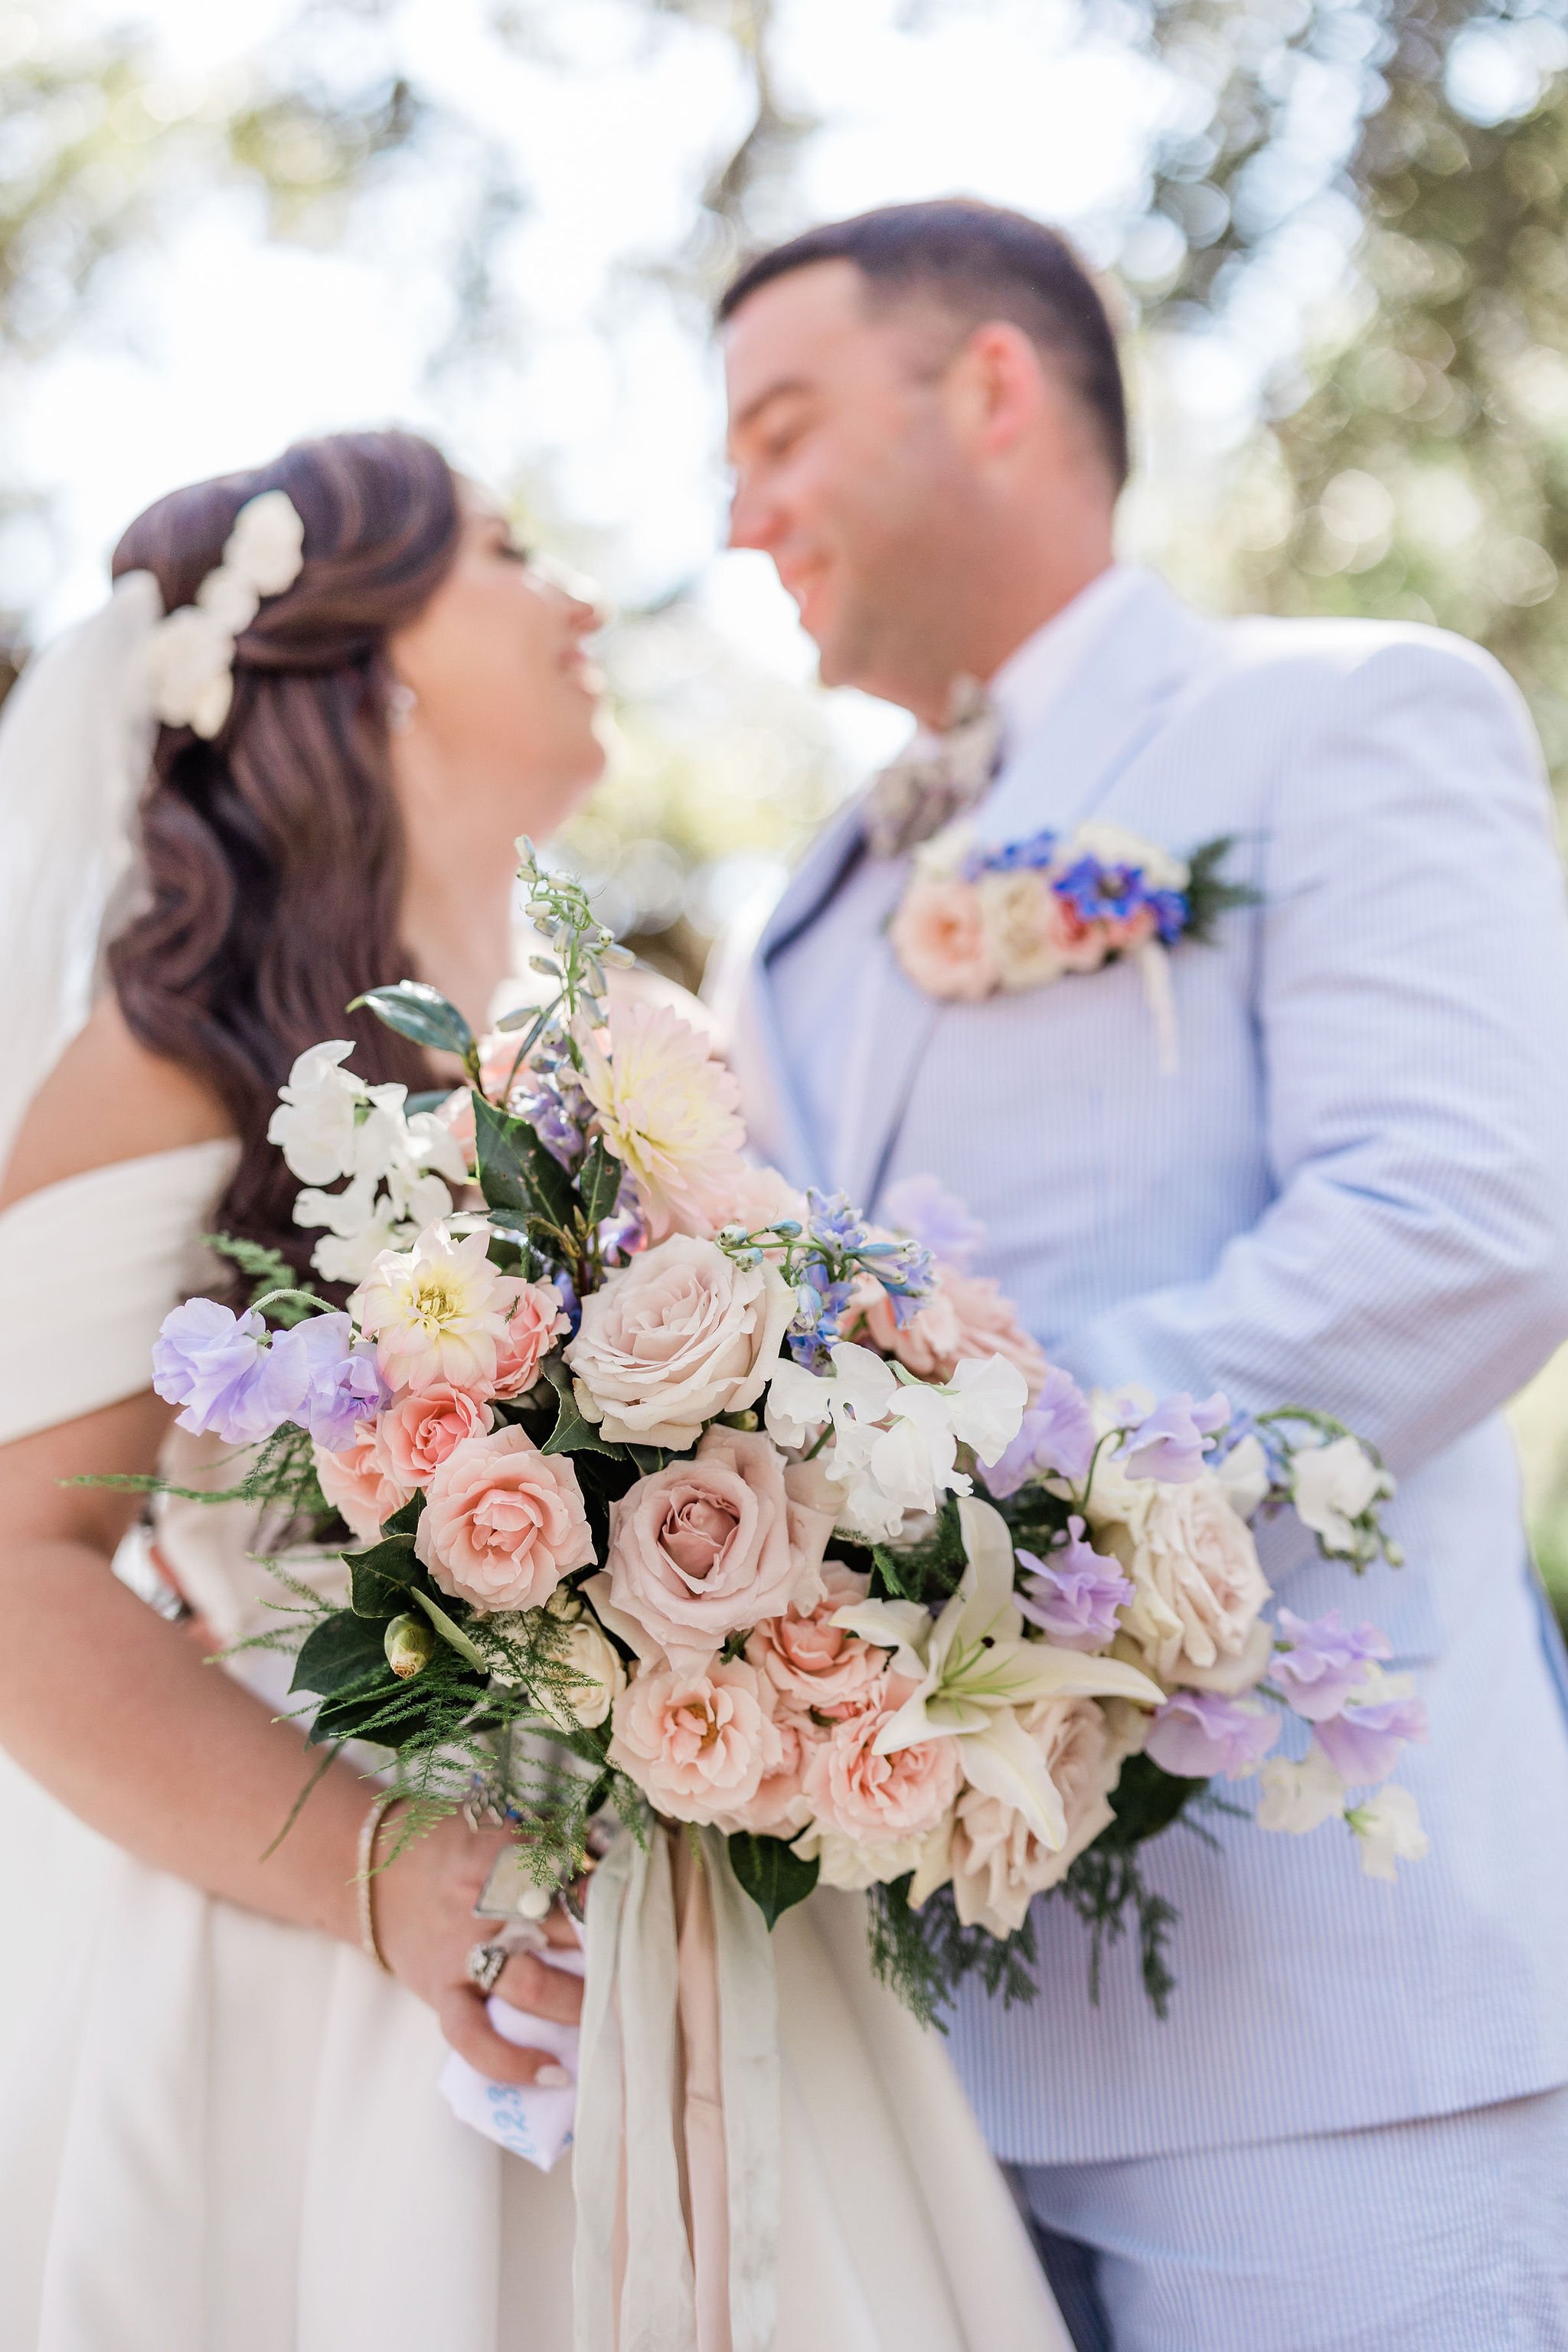 Victoria-and-stuarts-pastel-spring-wedding-at-the-forsyth-park-fountain-and-the-mansion-on-forsyth-in-savannah-georgia-planned-by-savannah-wedding-planner-and-savannah-wedding-florist-ivory-and-beau-1.JPG